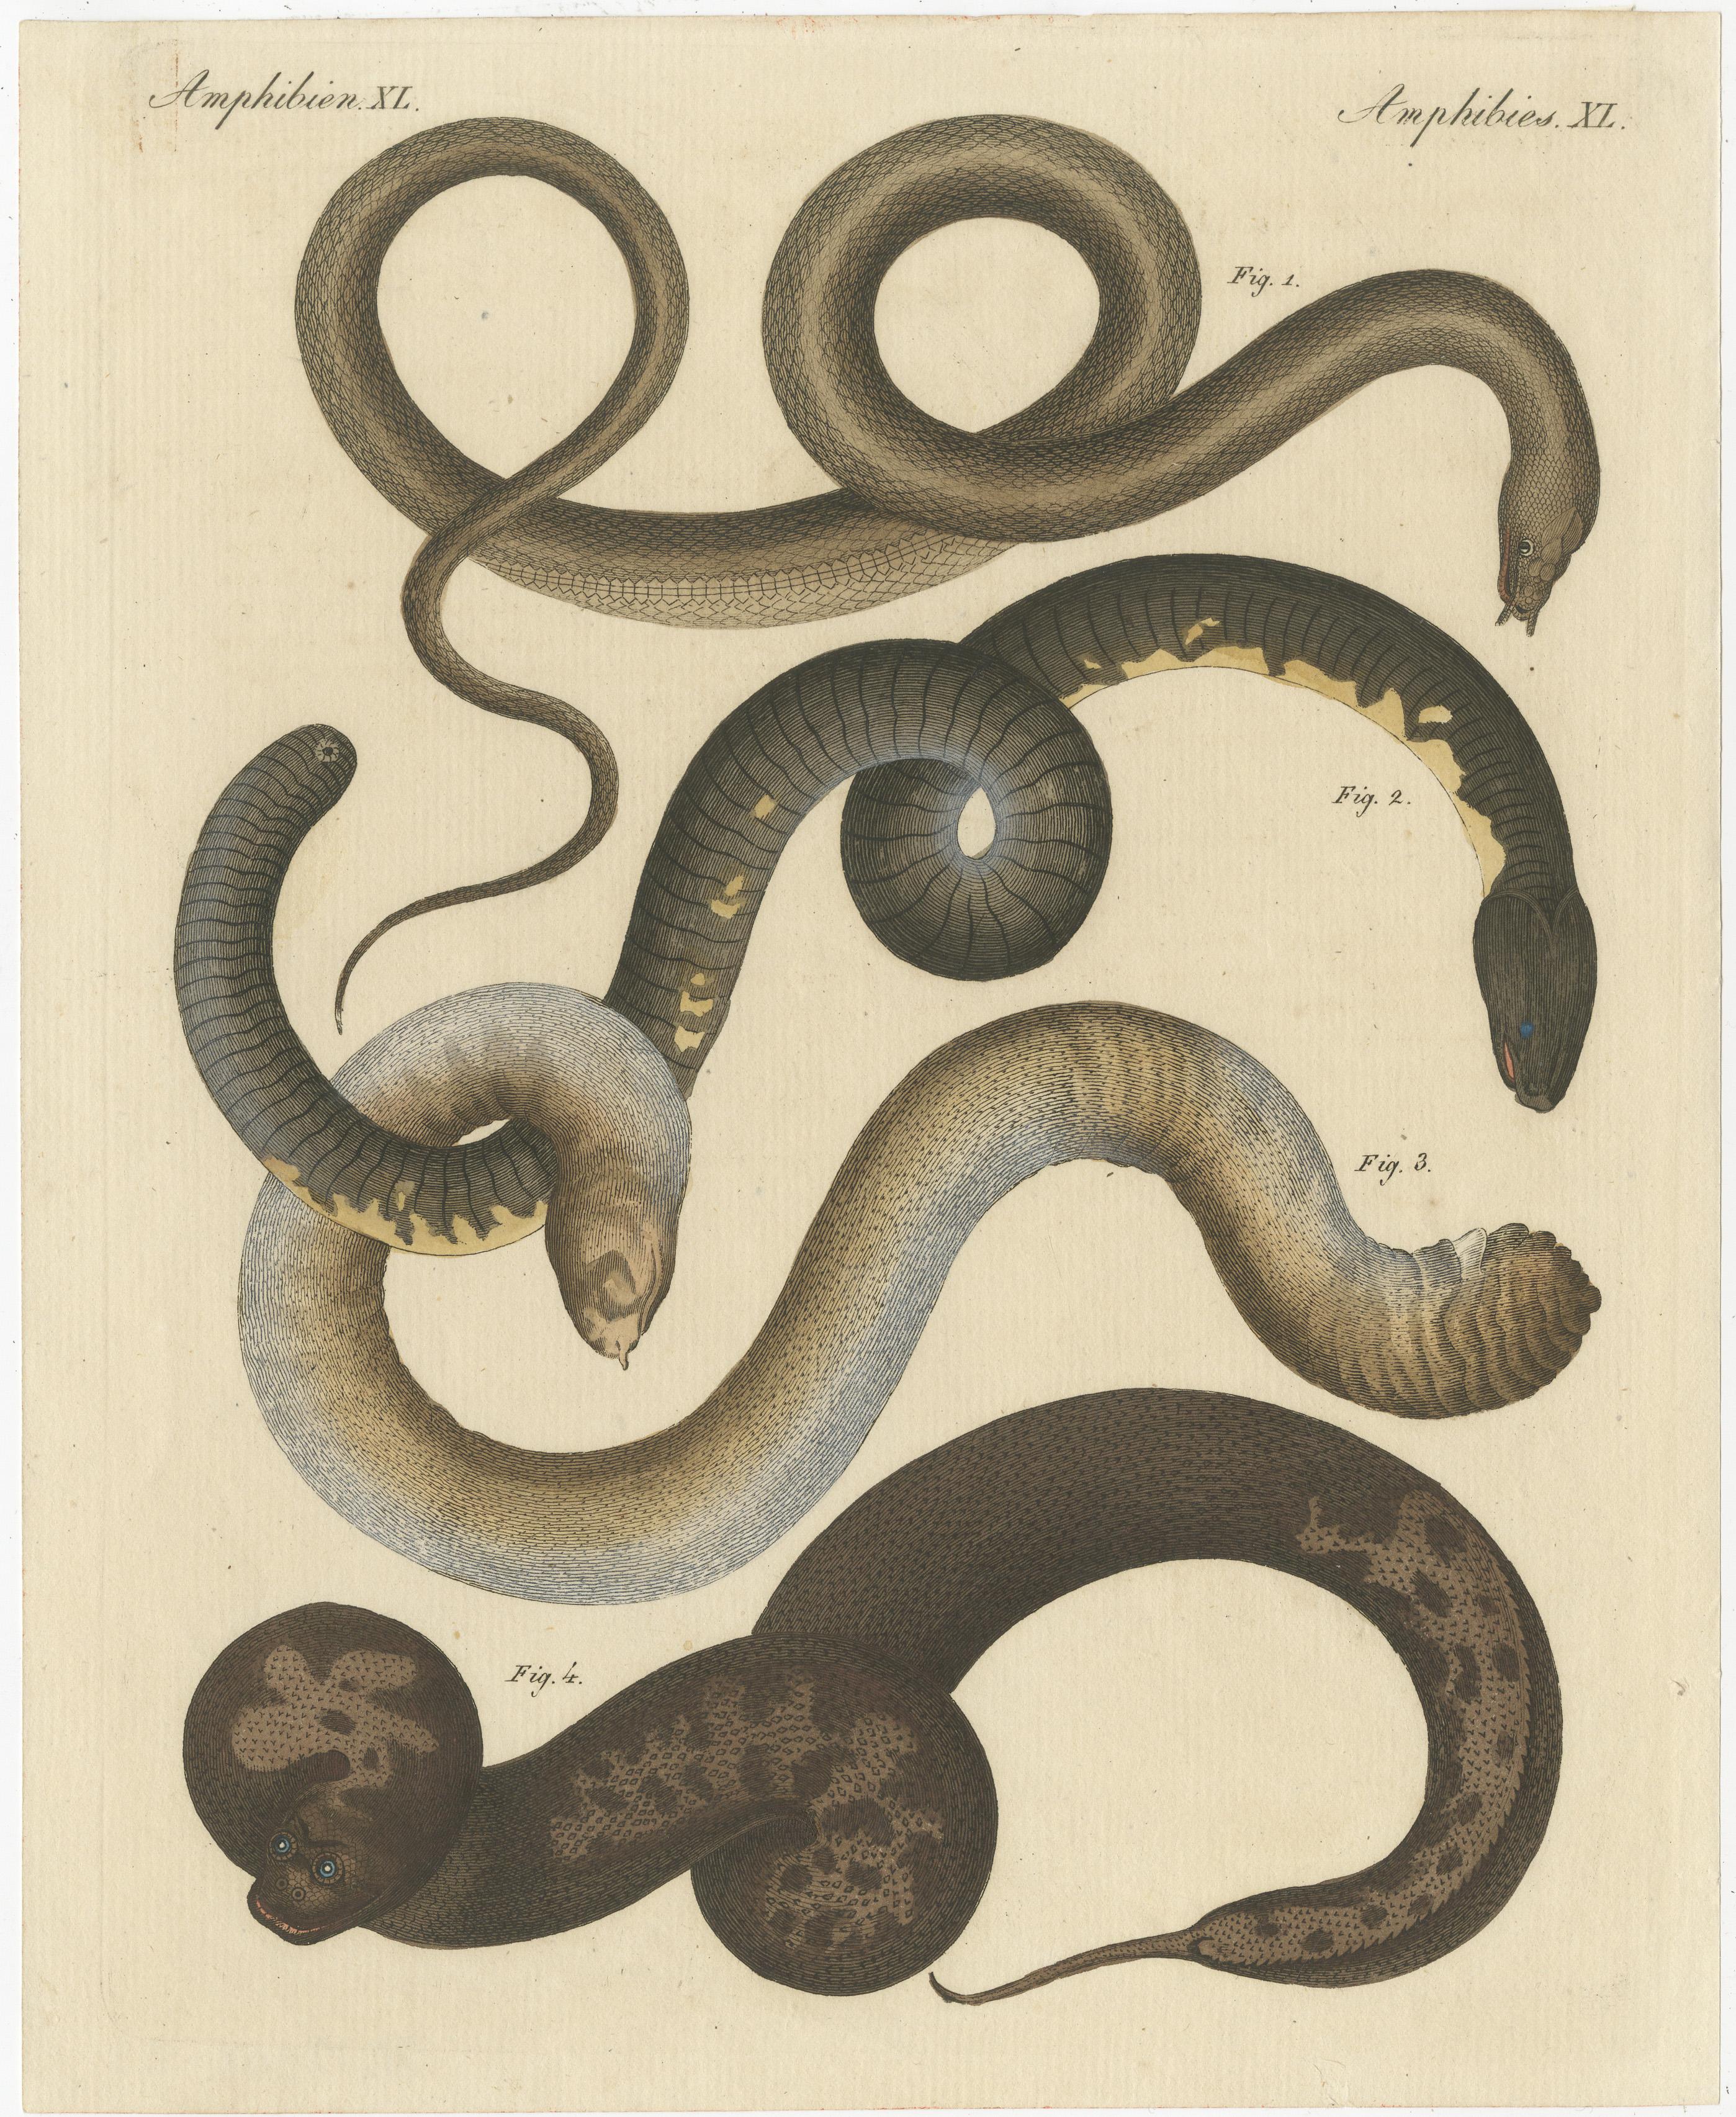 Original antique print of various snakes and caecilian species, including the tentacled snake. This print originates from 'Bilderbuch fur Kinder' by F.J. Bertuch. Friedrich Johann Bertuch (1747-1822) was a German publisher and man of arts most